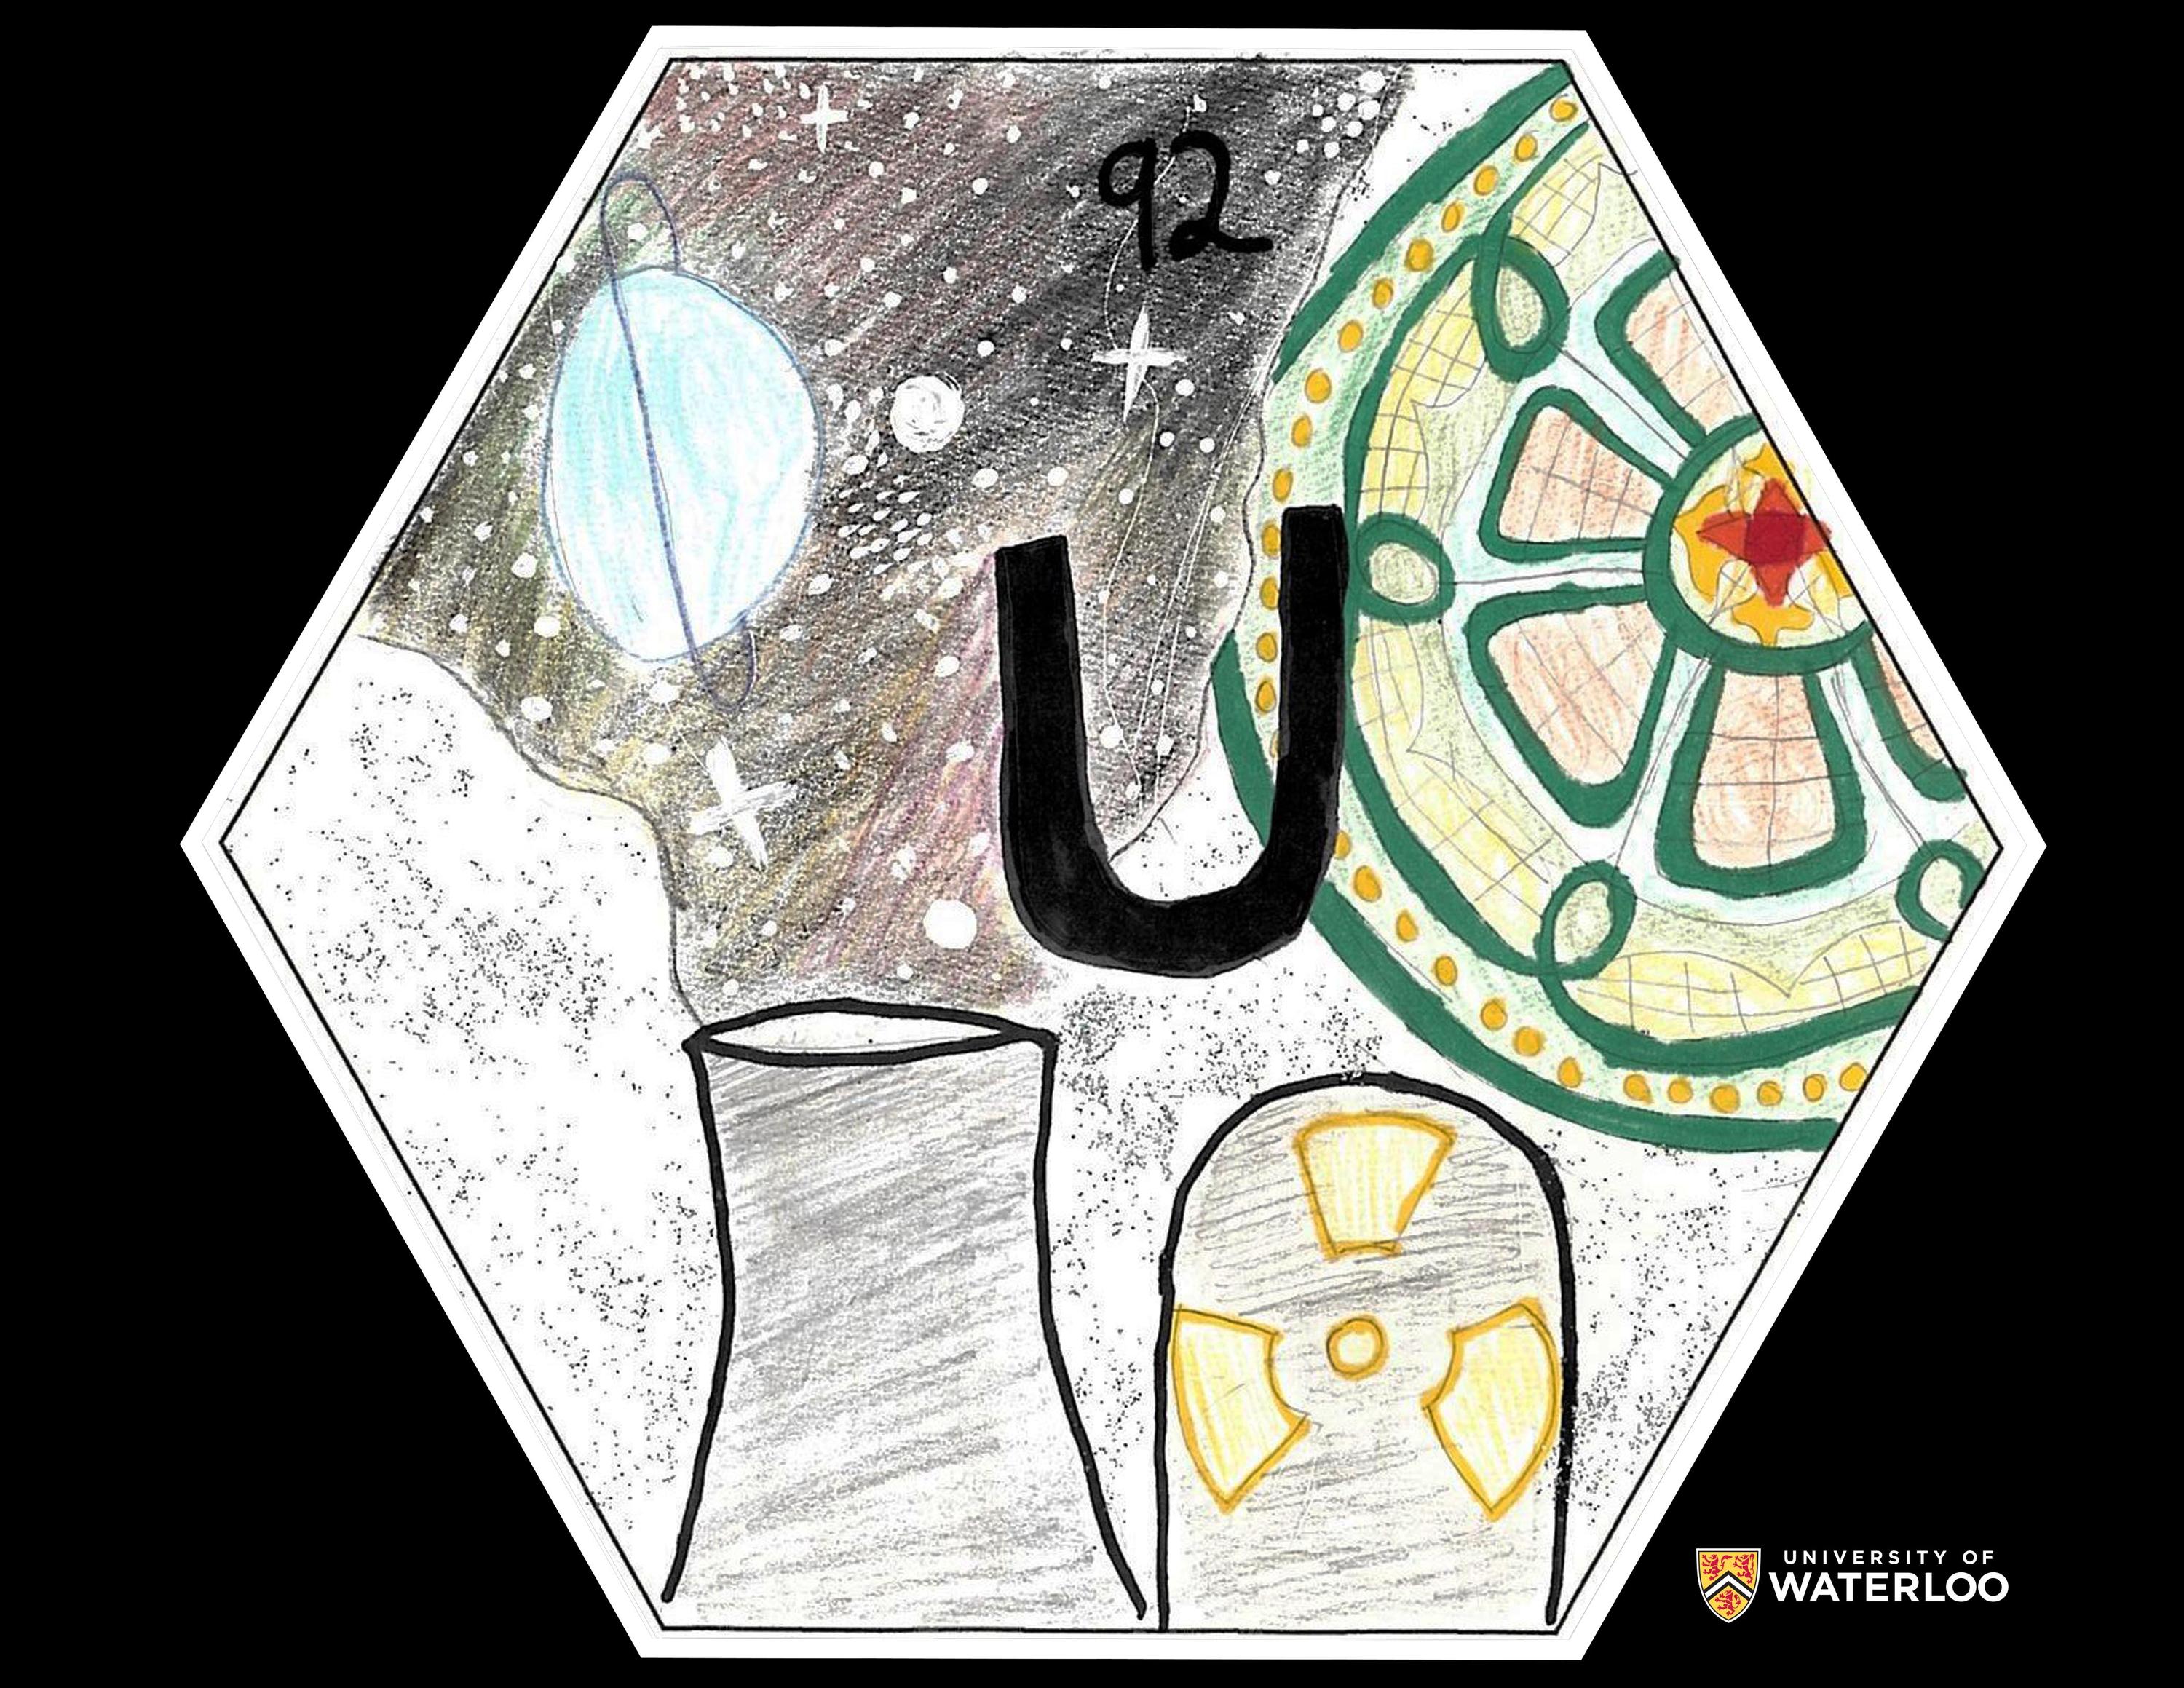 Pencil and pen on paper. Chemical symbol “U” in the centre with “92” above. Symbols of uranium in the background include nuclear power plant, stained glass window, glittery white substance representing raw uranium ore and the night sky featuring the planet Uranus.